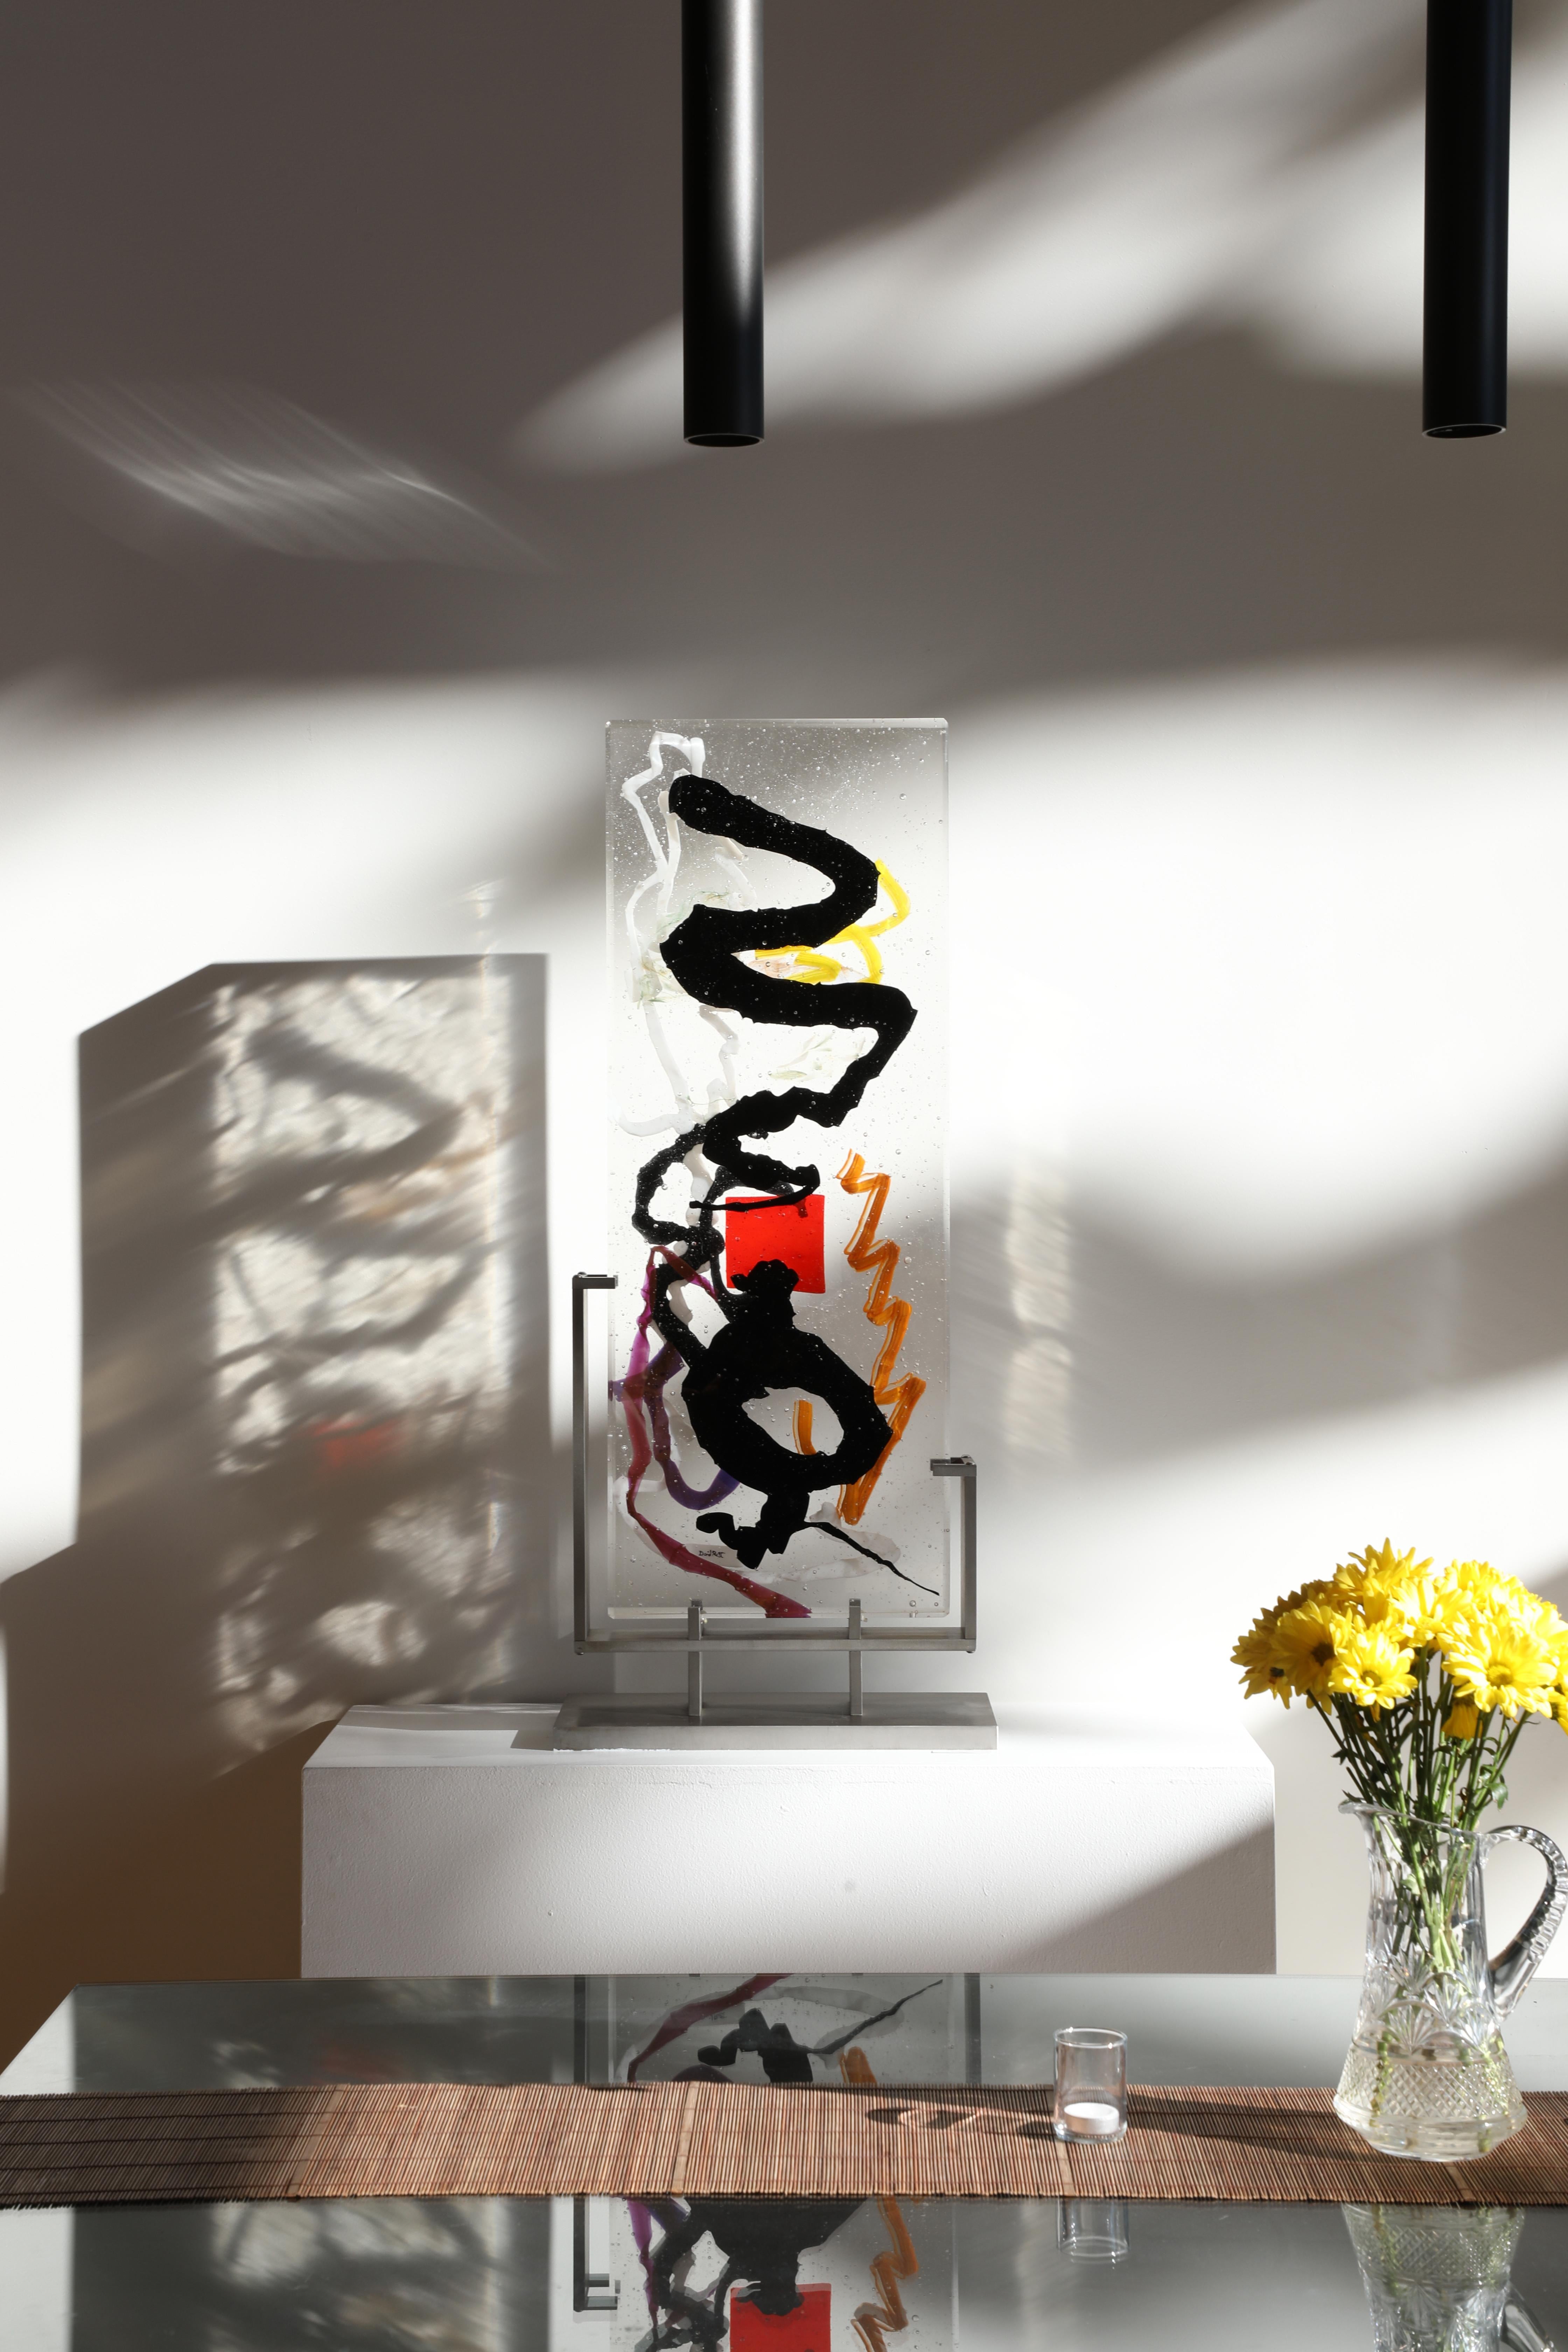 'Rapota' is a contemporary abstract cast glass sculpture by David Ruth from his Internal Space series. It was the last completed sculpture from this series. It features painterly brushstroke formations in glass called trails. These trails are in